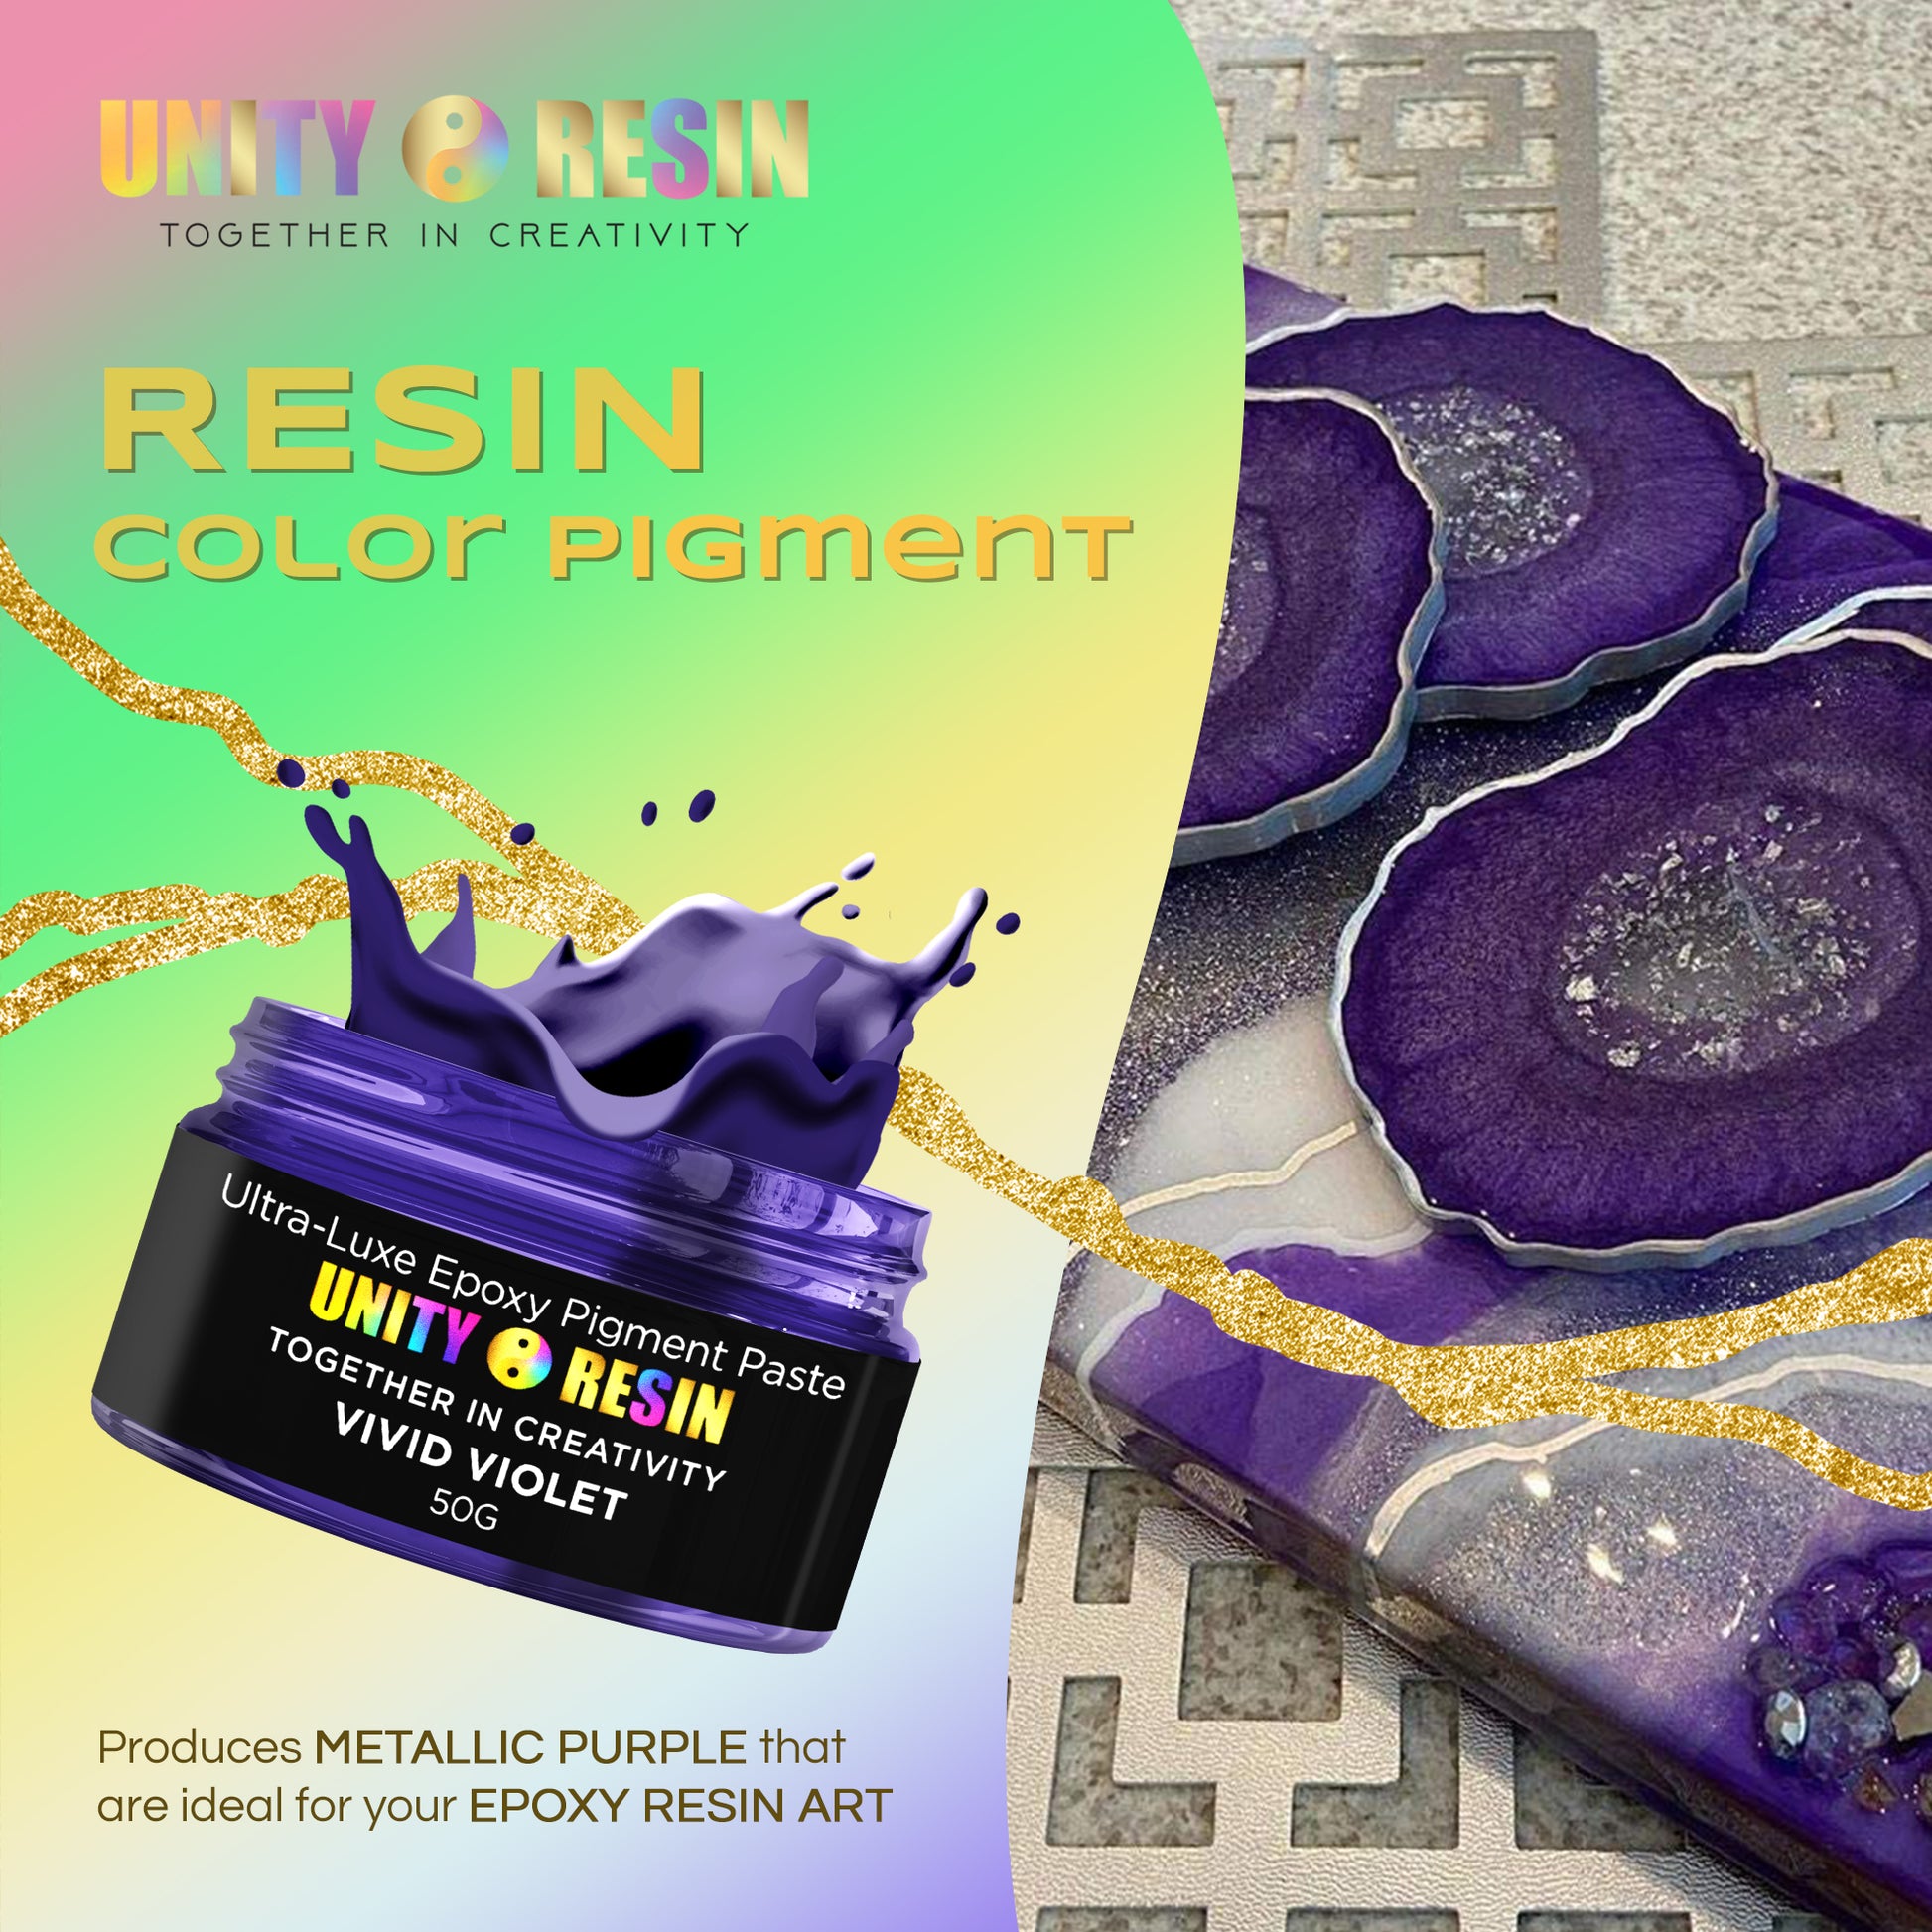 How to use pigment paste for resin colouring